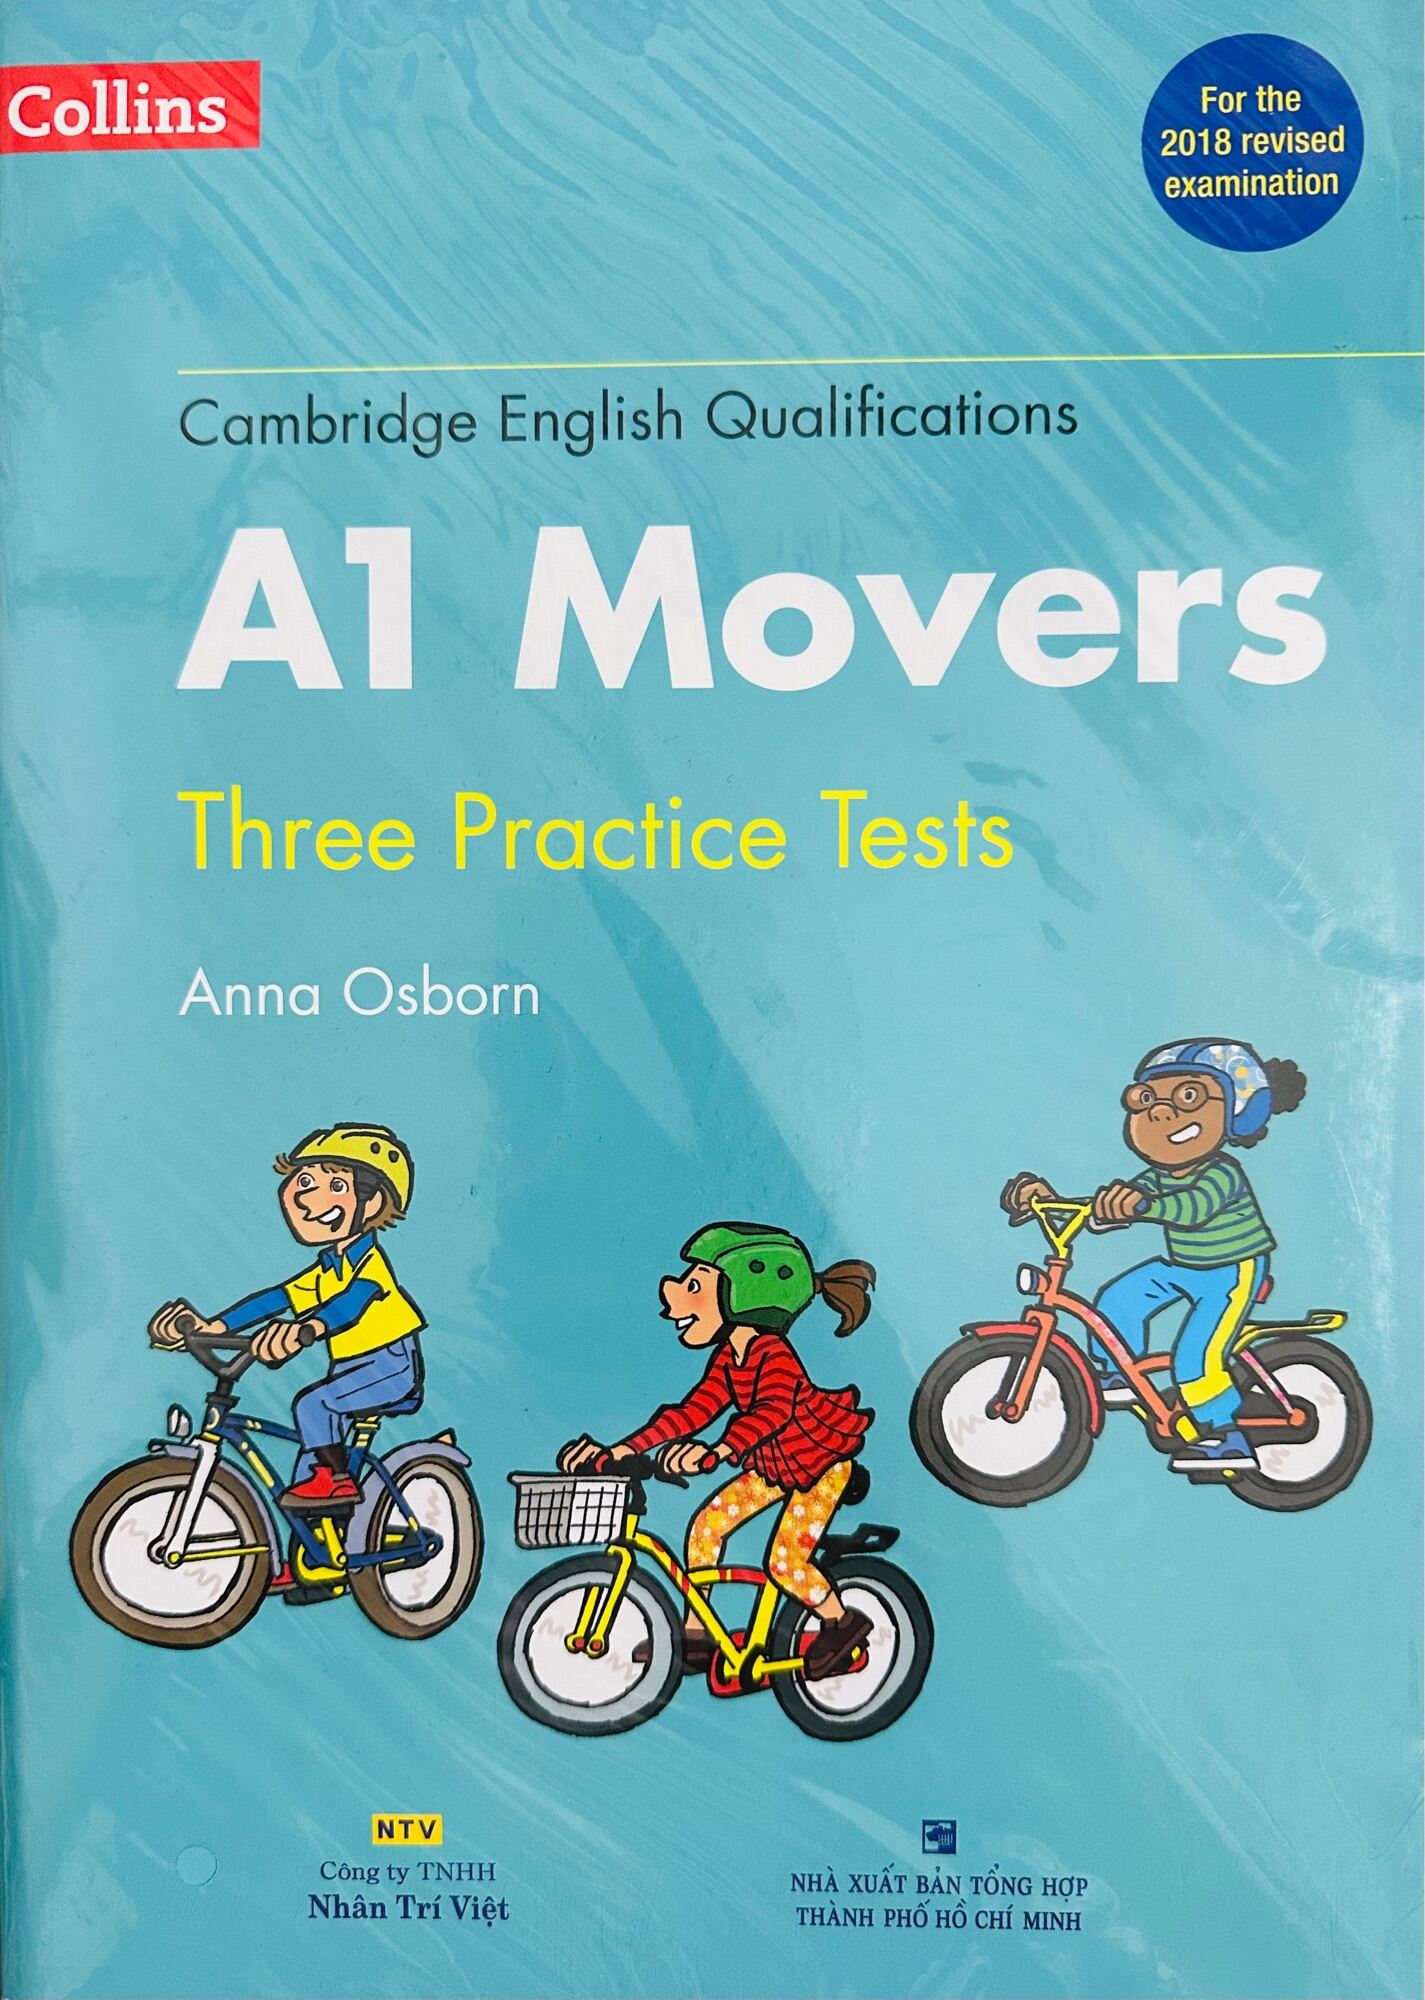 A1 Movers - Three Practice Tests